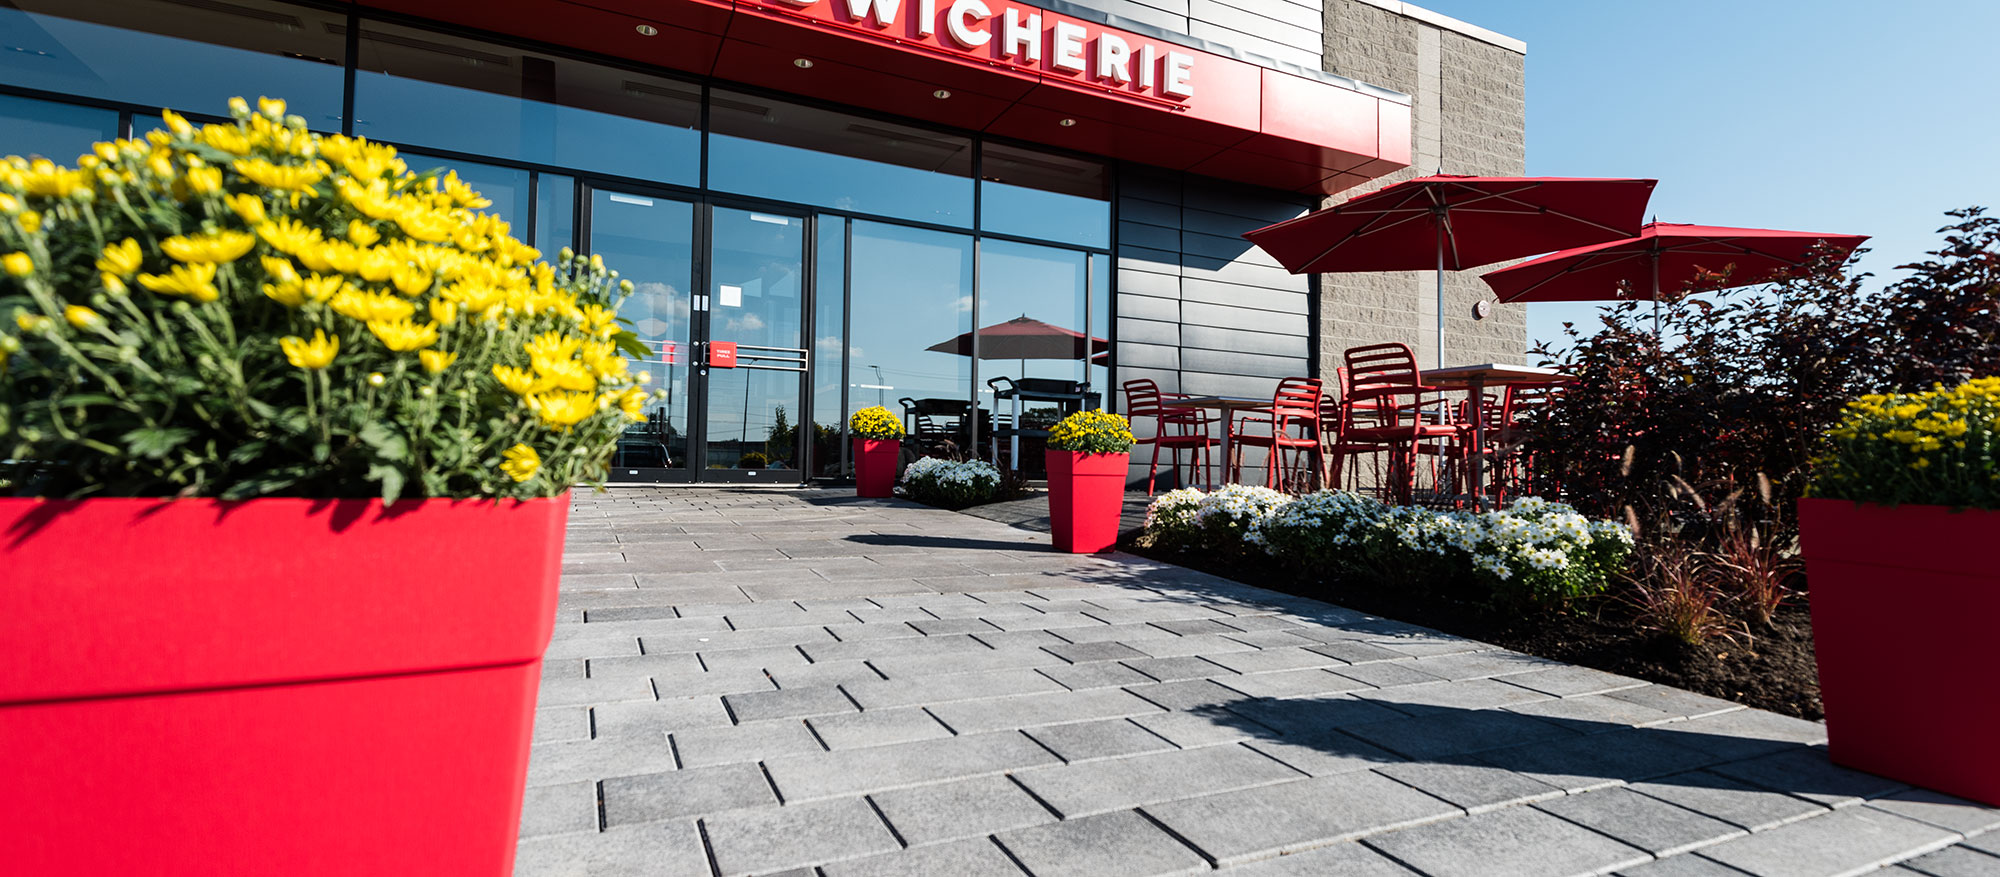 Artline pavers, landscaping and  an outdoor dining area with umbrellas and planters matching the red theme, lead to  Boulangerie Paillard.